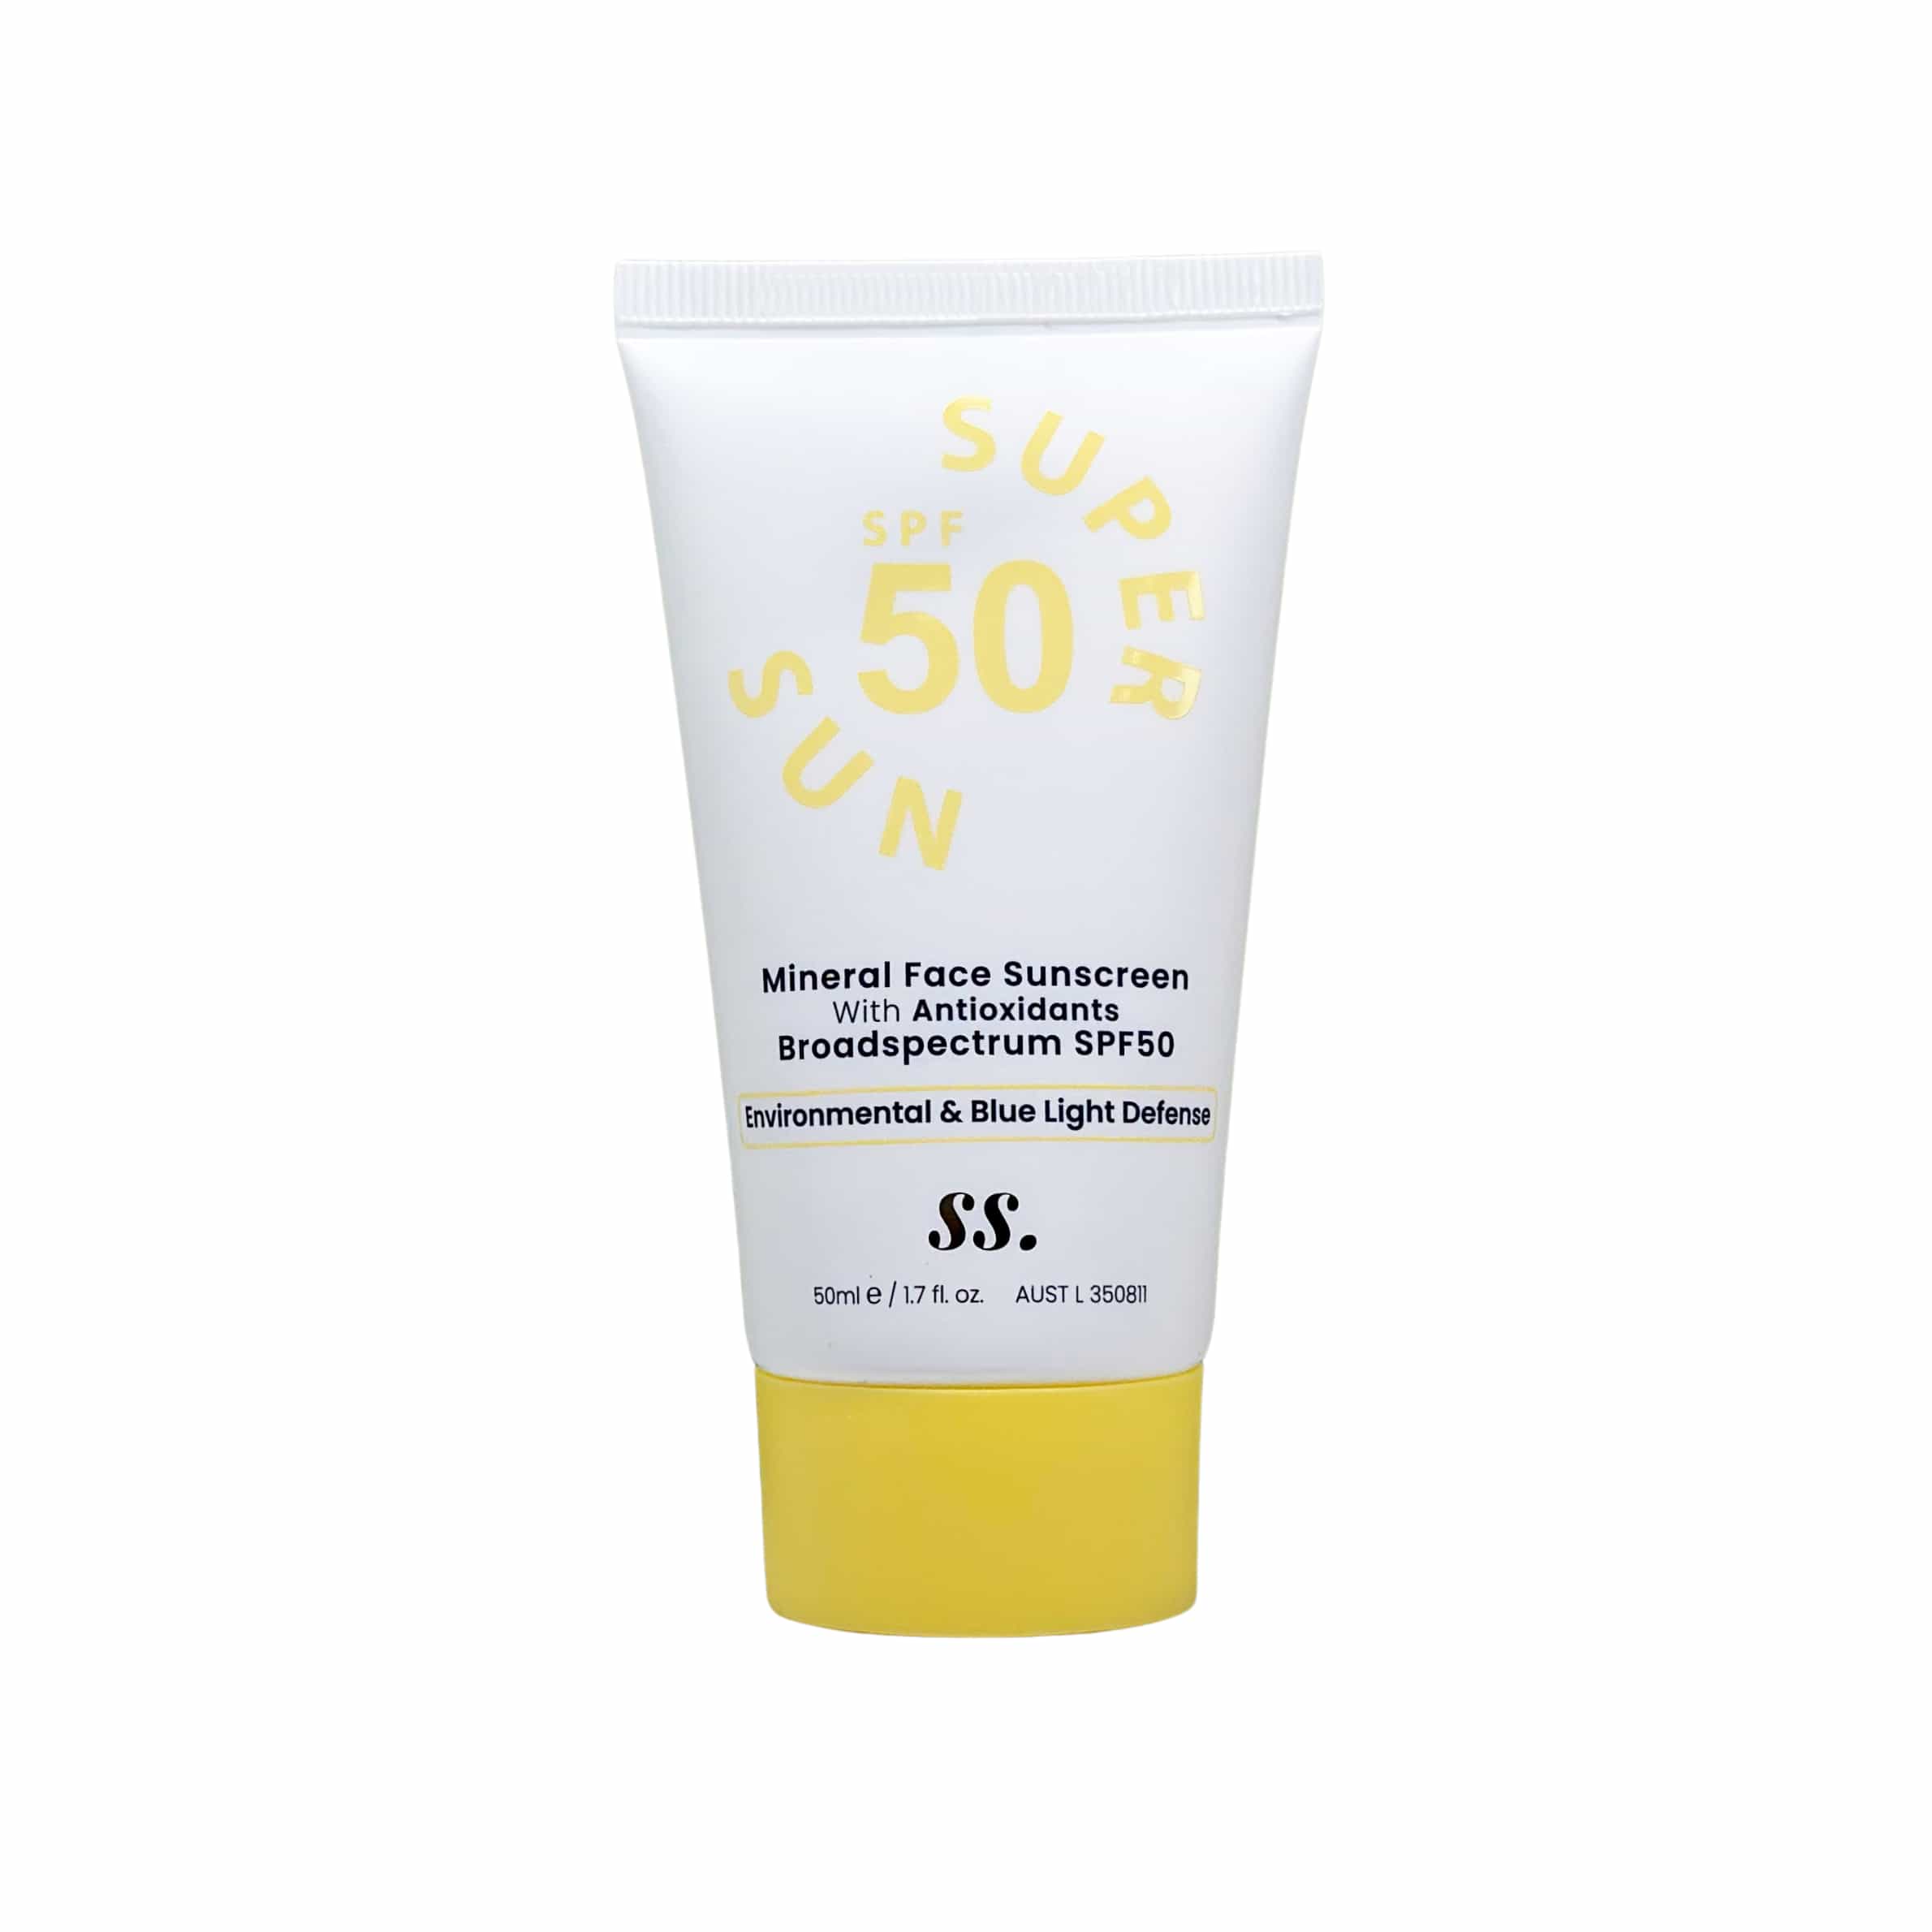 A tube of Sunny Skin Super Sun SPF50 on a white background uploaded on Spa Circle Brands product listing page.